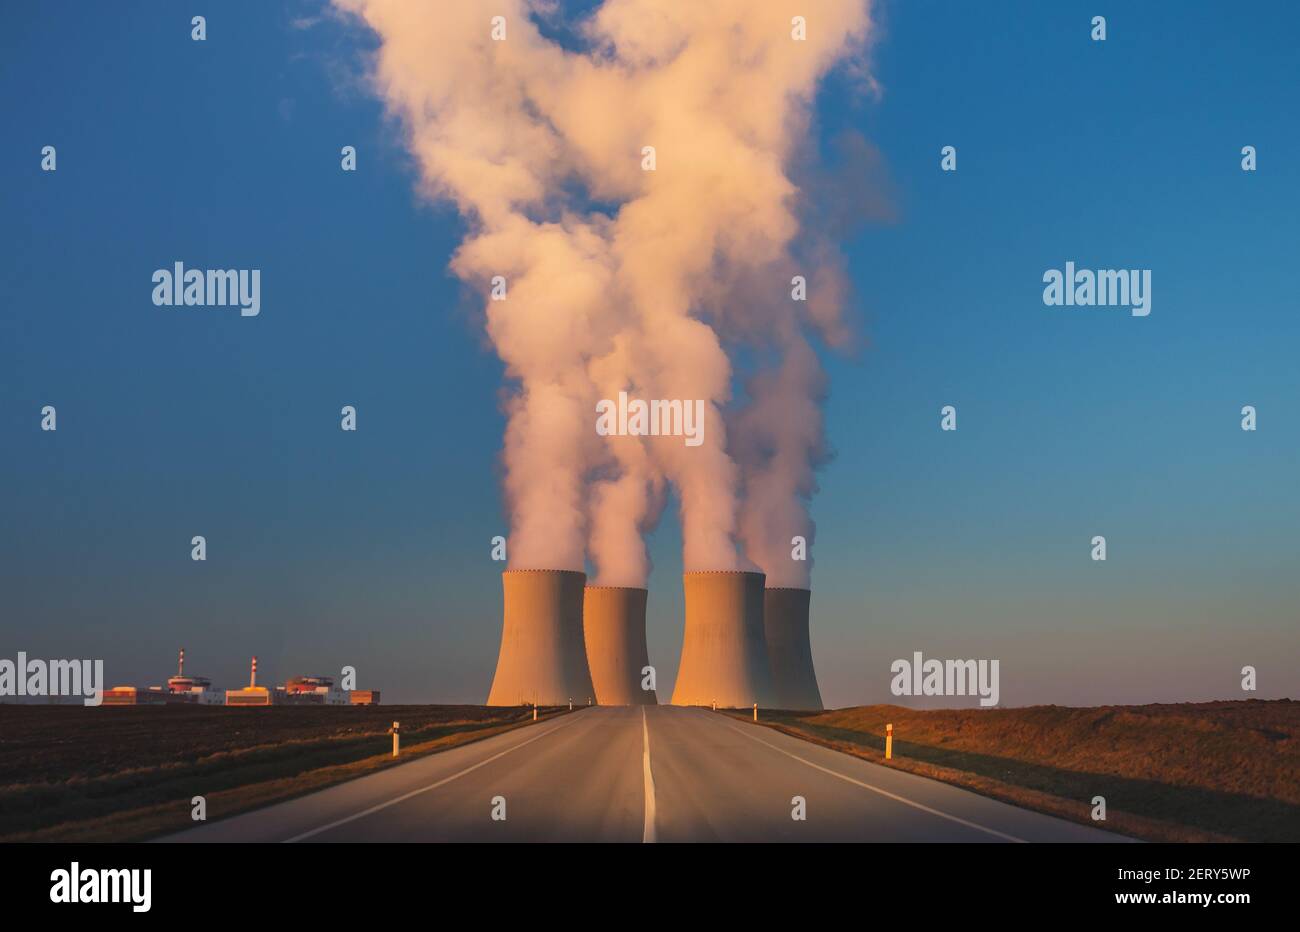 Temelin, Czech republic - 02 28 2021: Nuclear Power Plant, Steaming cooling towers in the landscape at sunset, road leading to factory in foreground Stock Photo